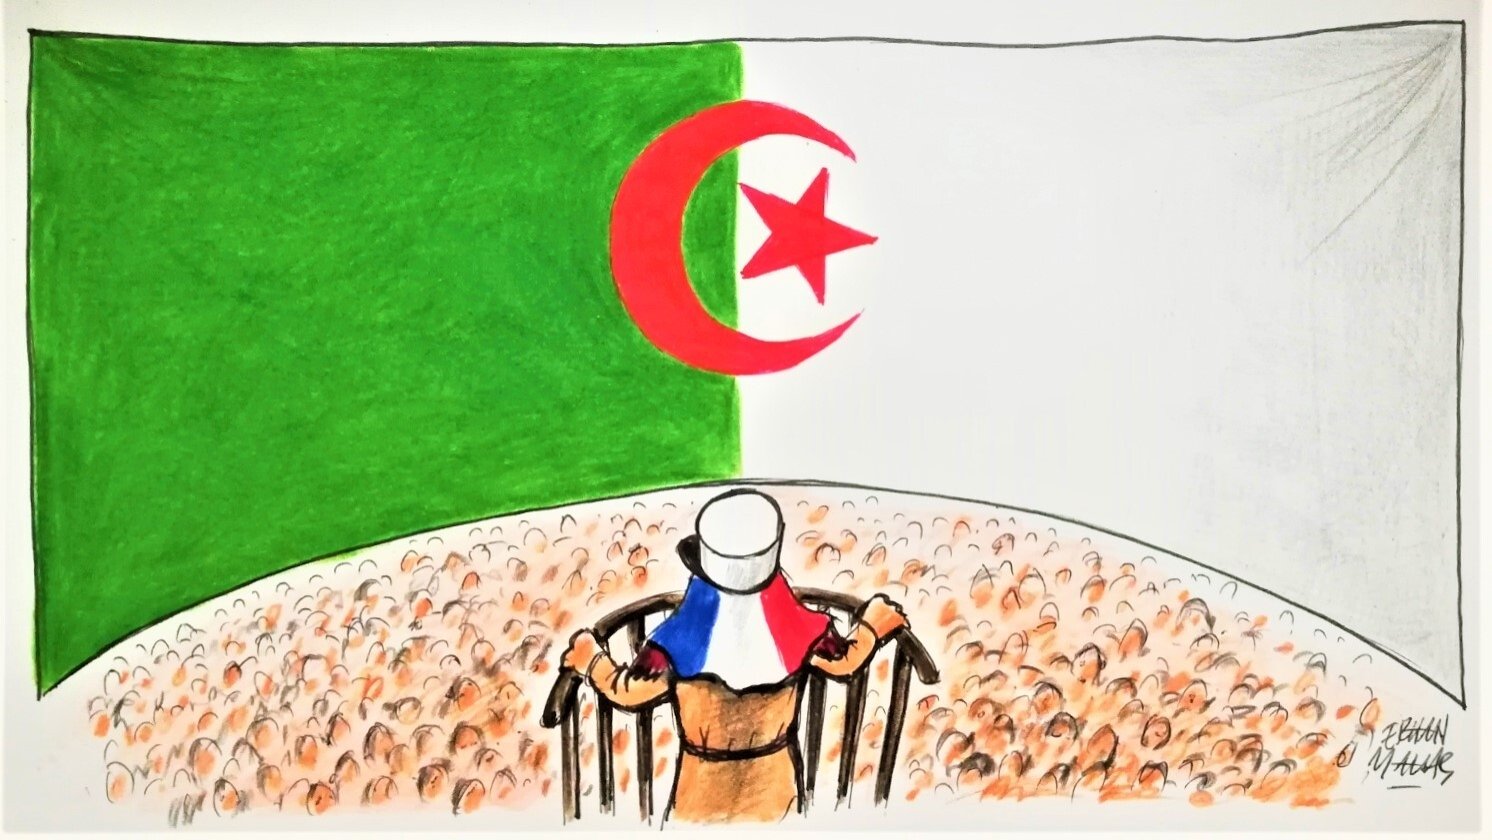 Illustration by Erhan Yalvaç shows a man with French-flagged hat confronting the Algerian flag, symbolizing the tension between France and Algeria.